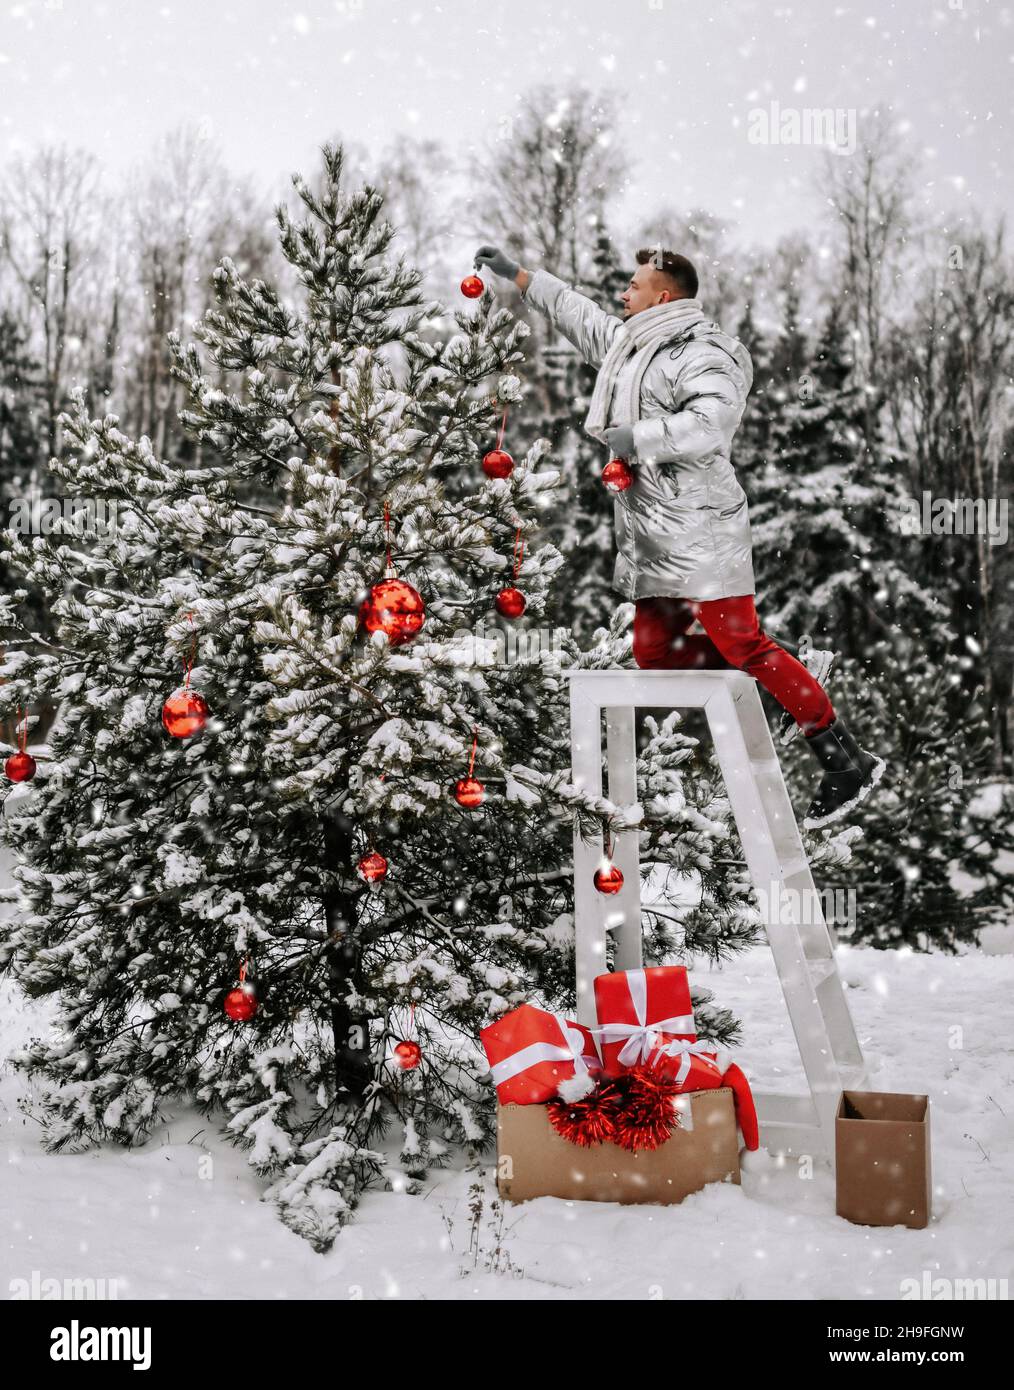 Young man guy in stylish winter clothing decorates Christmas tree with balls outdoors in winter snowy forest Stock Photo